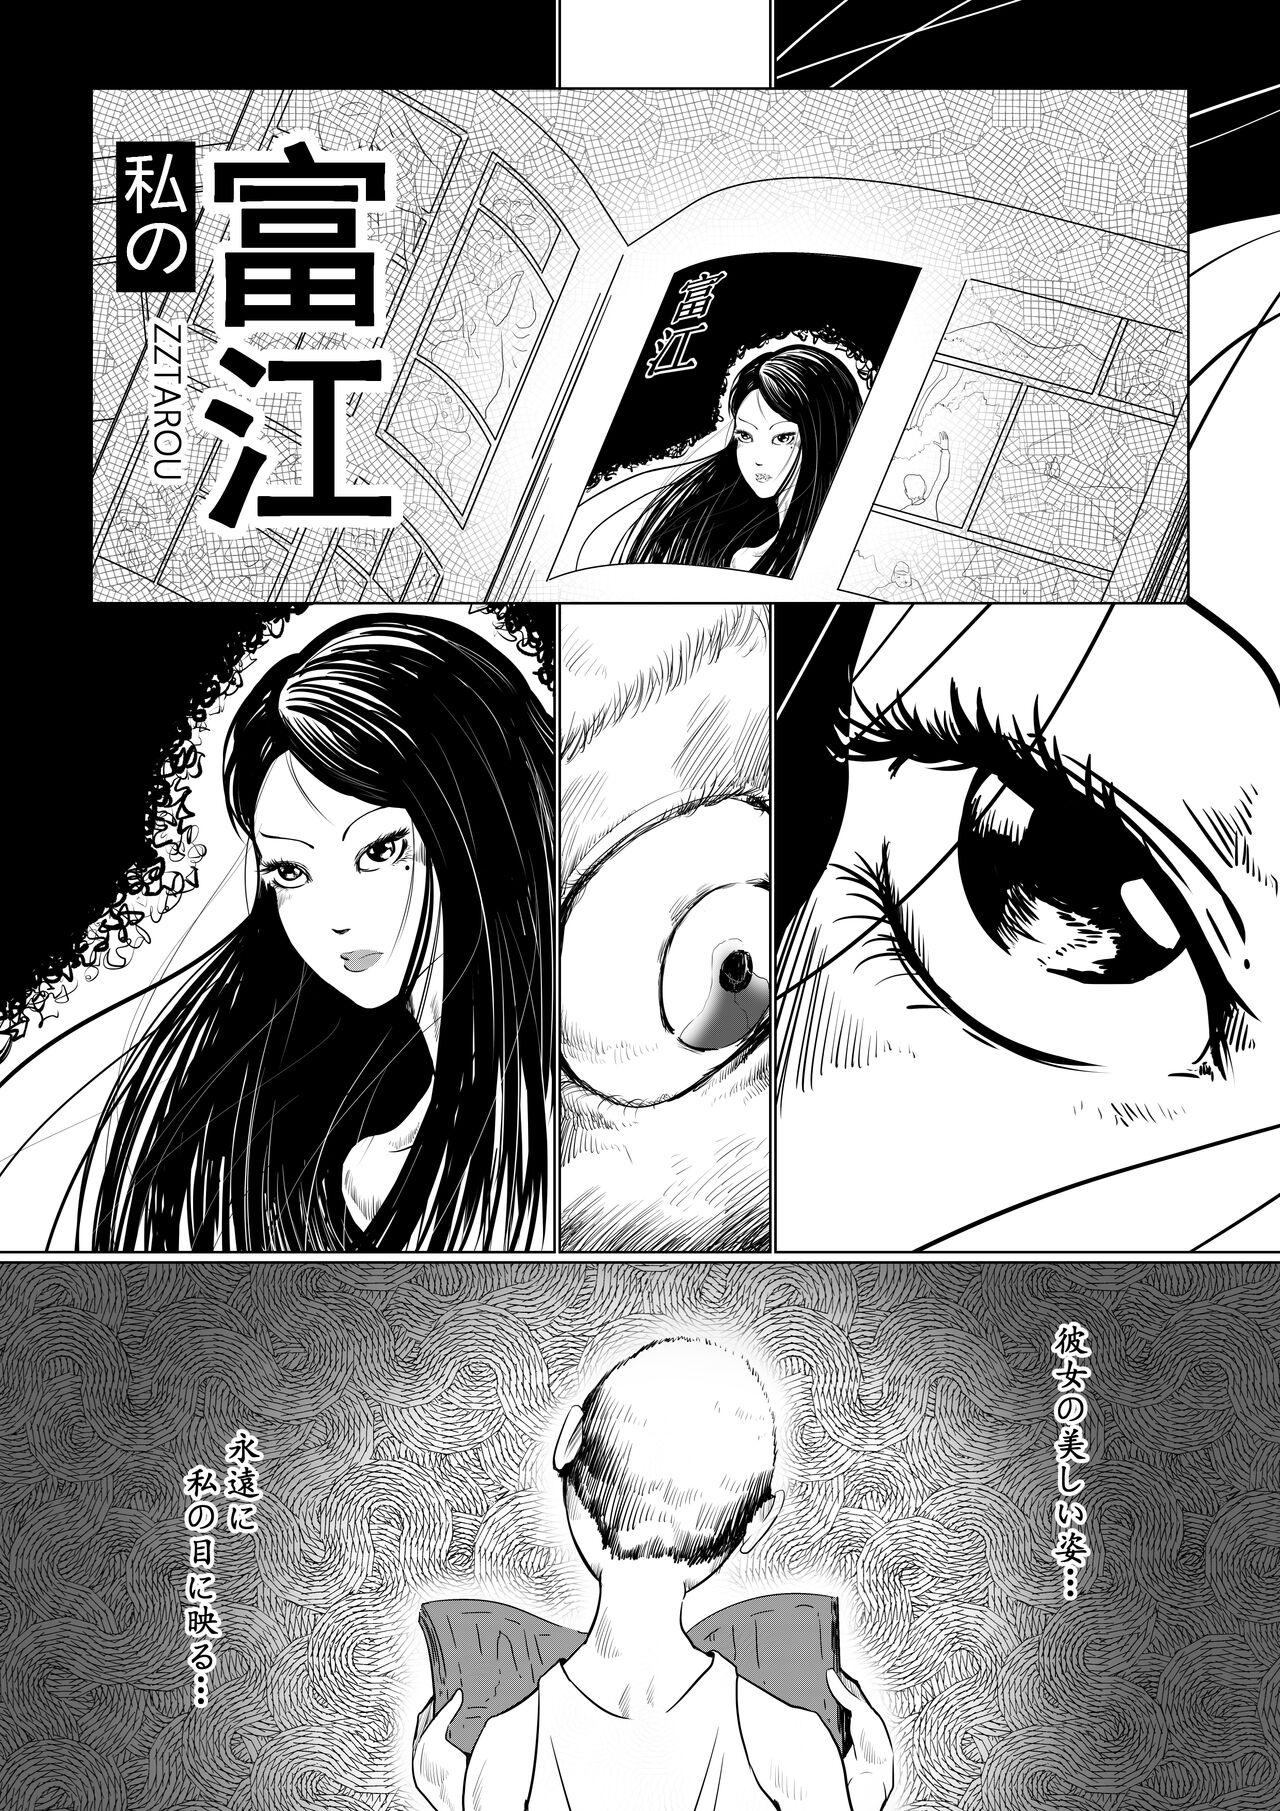 Amature Porn Tomie-sama no Doujin - Tomie Stepsiblings - Page 2